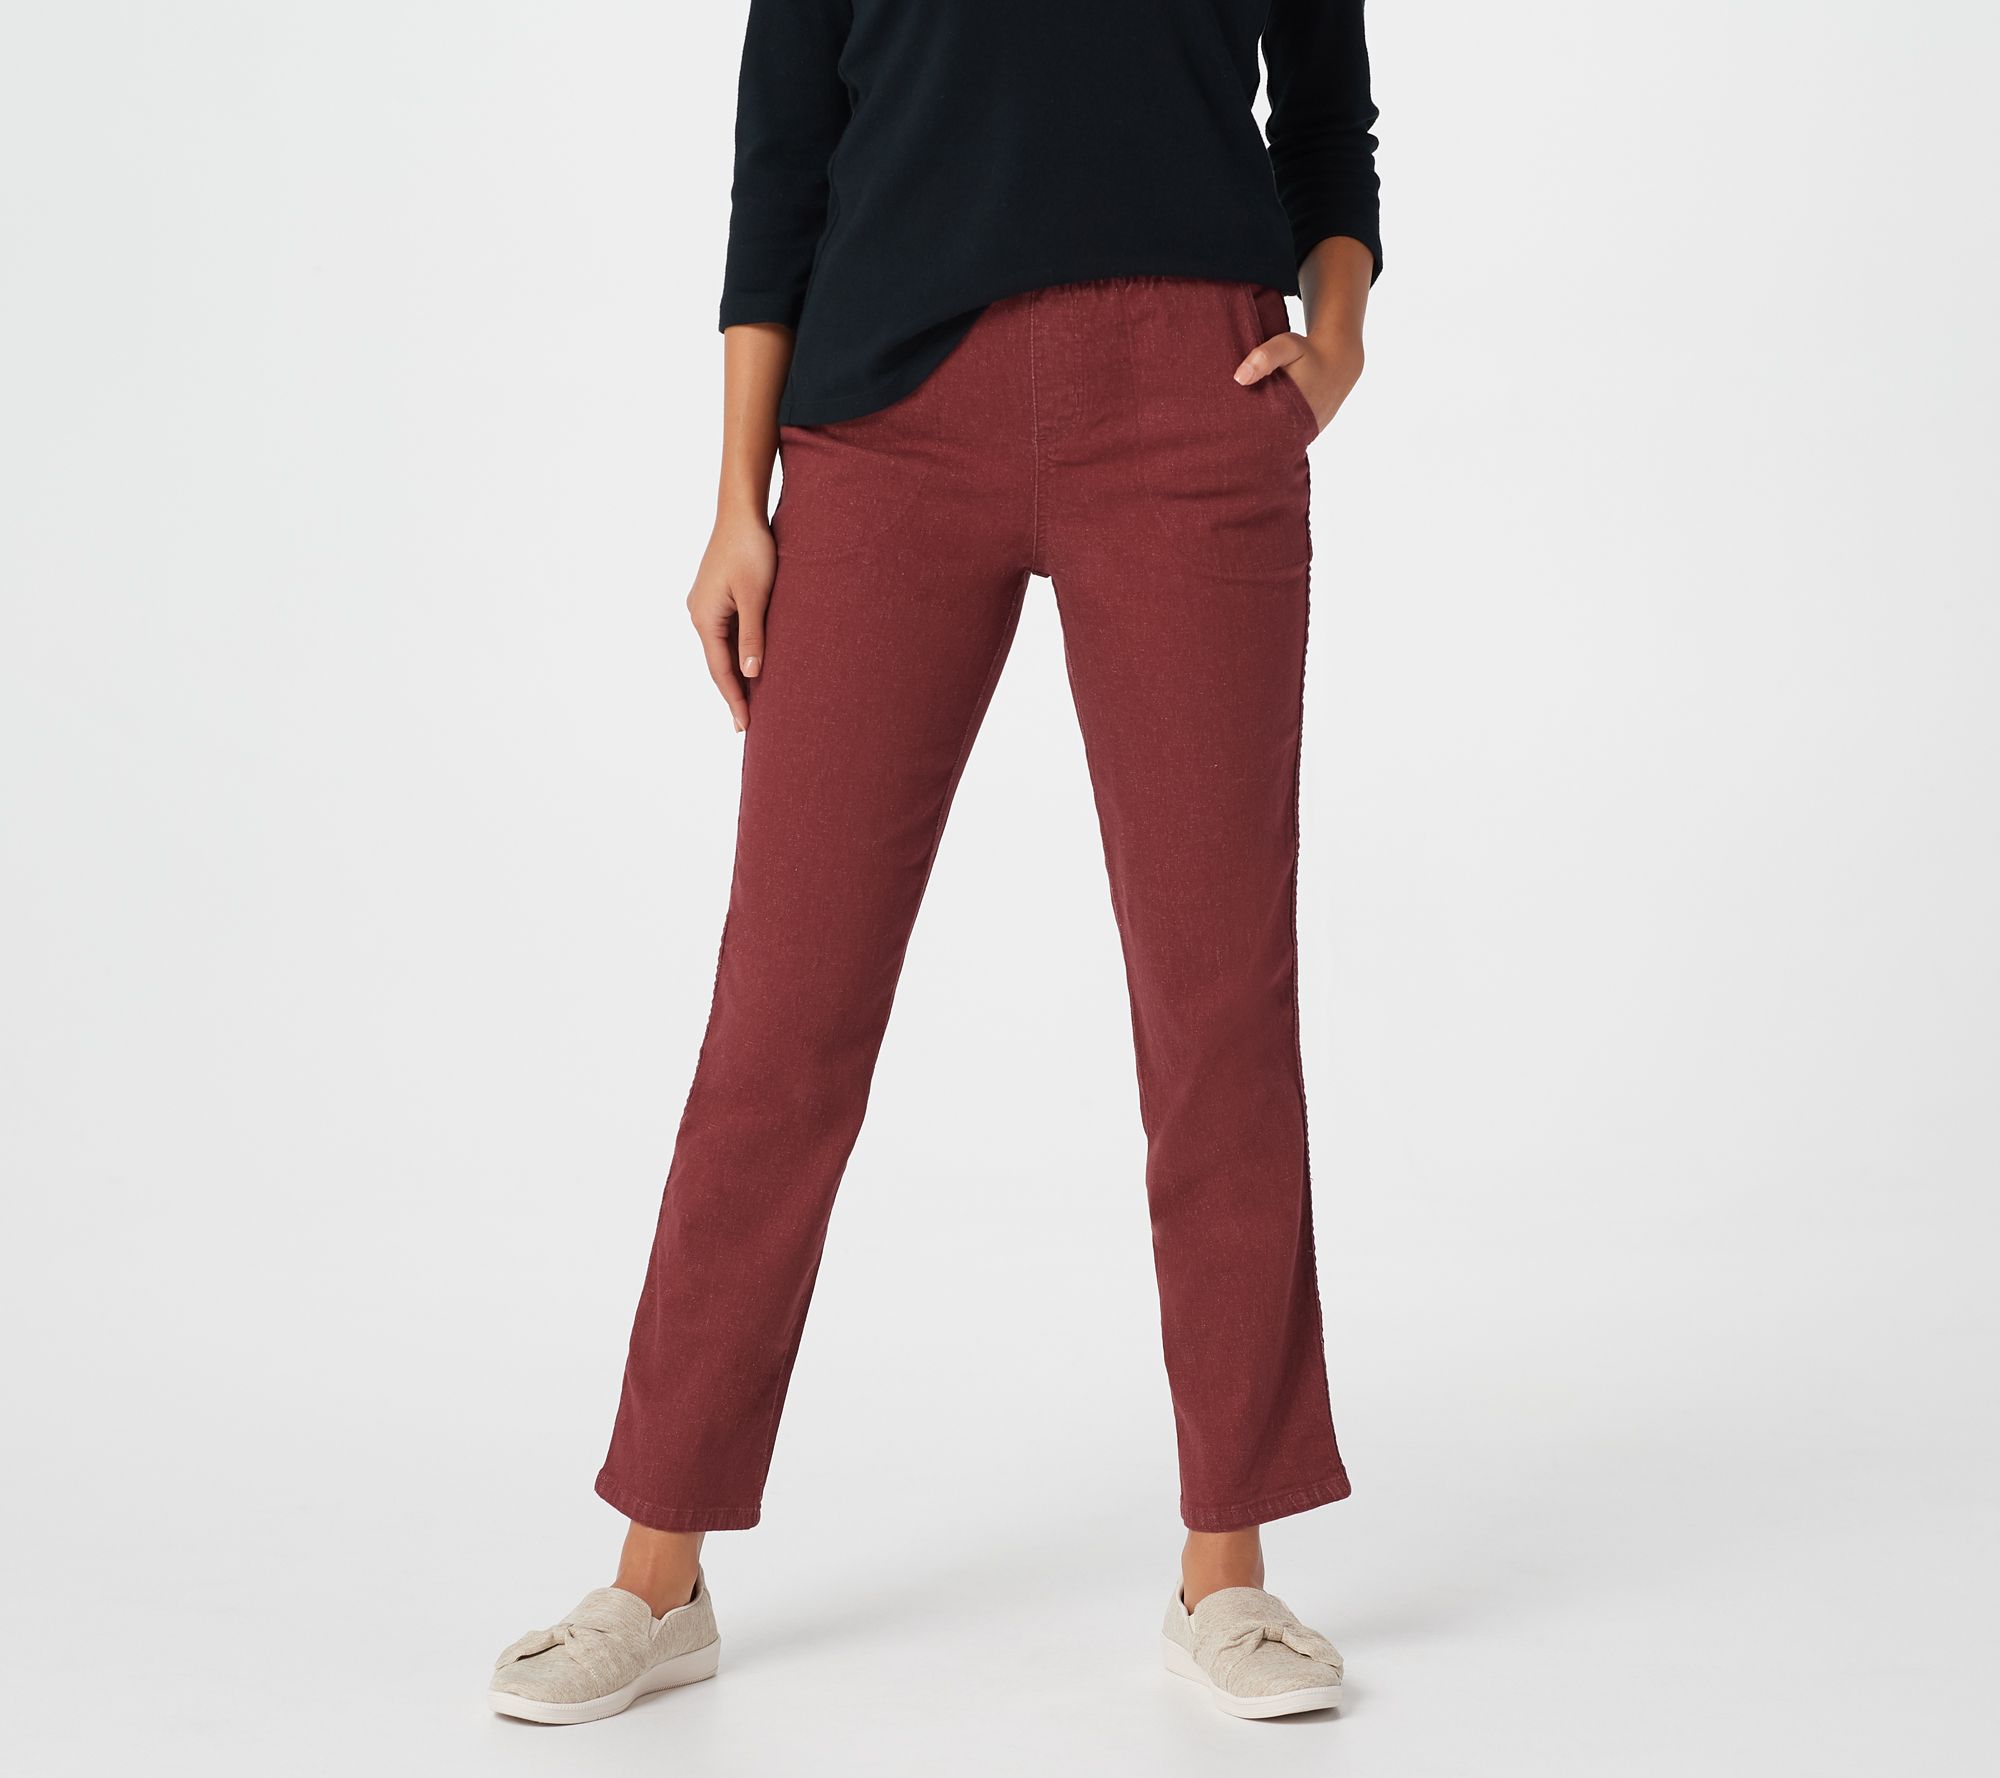 Scarlet Wine,Size PS Style Co Petite Womens Skinny Pull-On Pants 